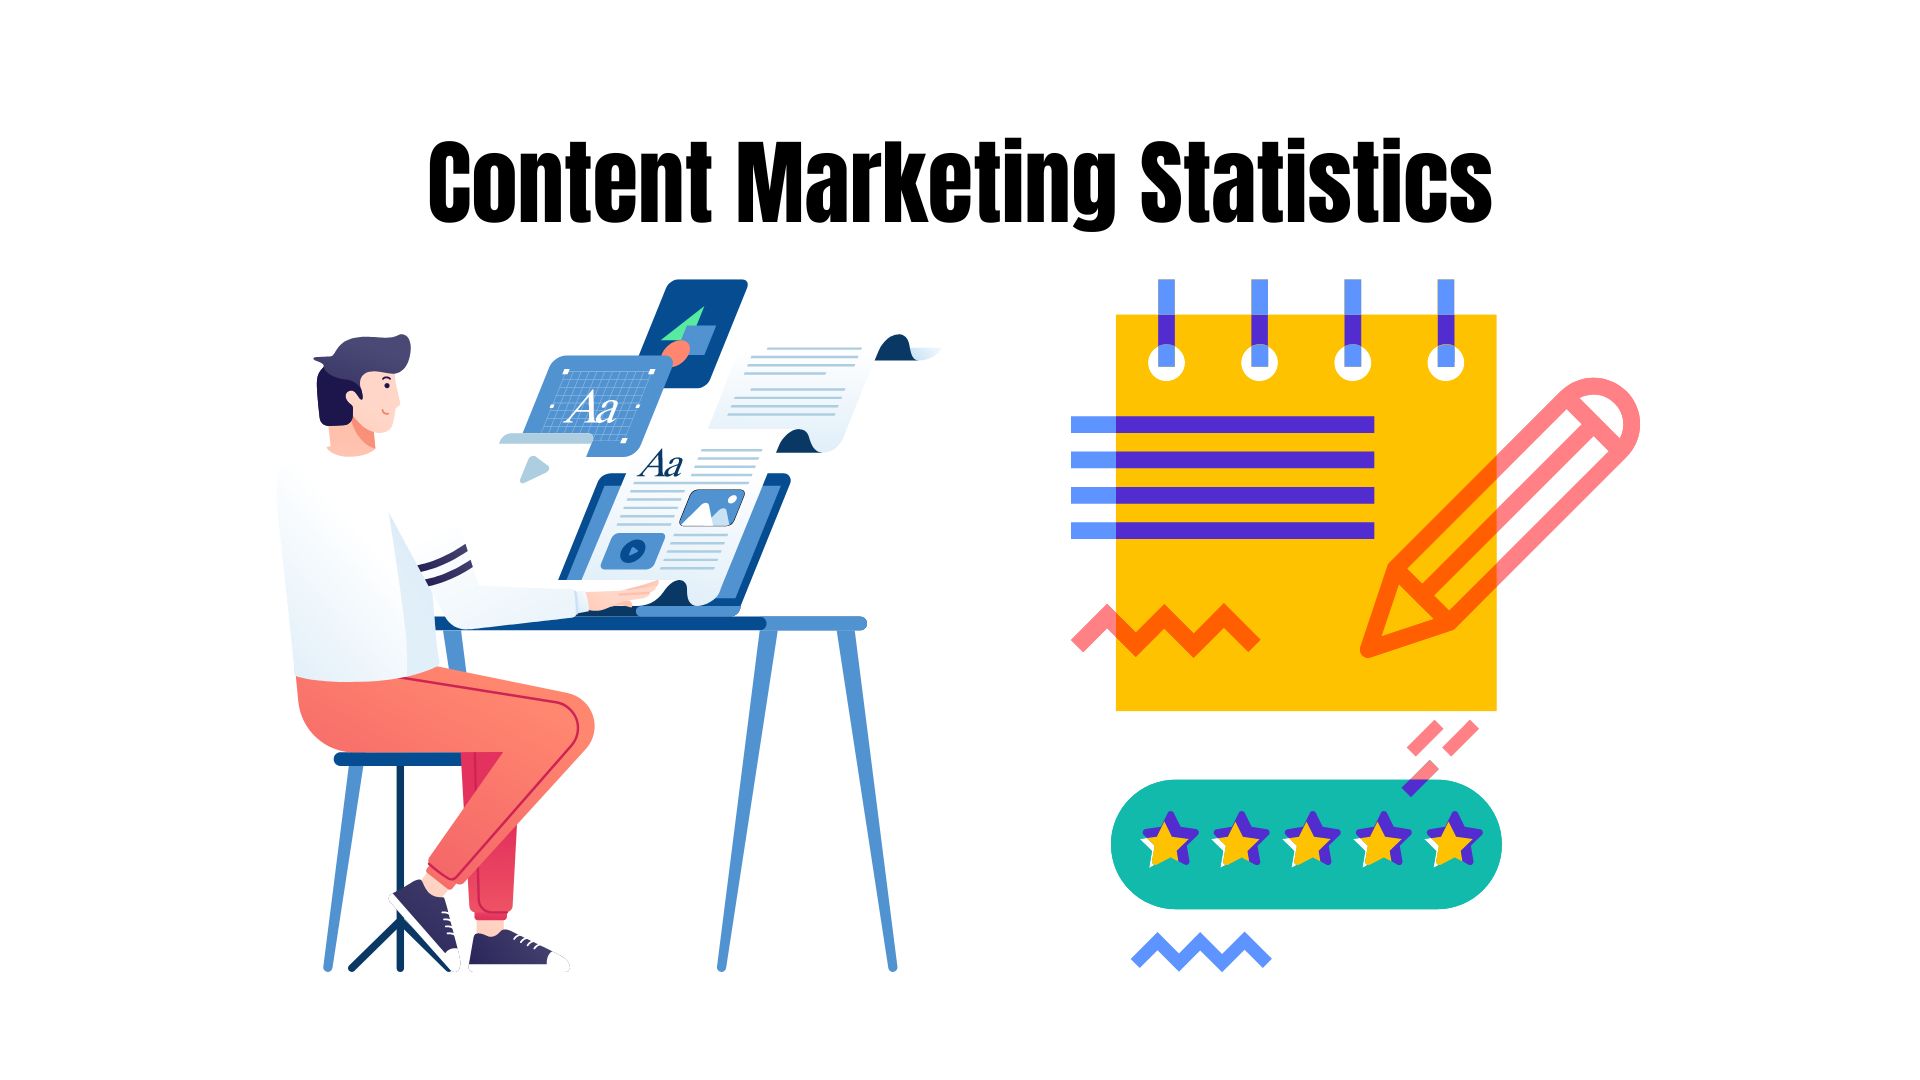 Content Marketing Statistics 2022 Trends, Facts and Market Size